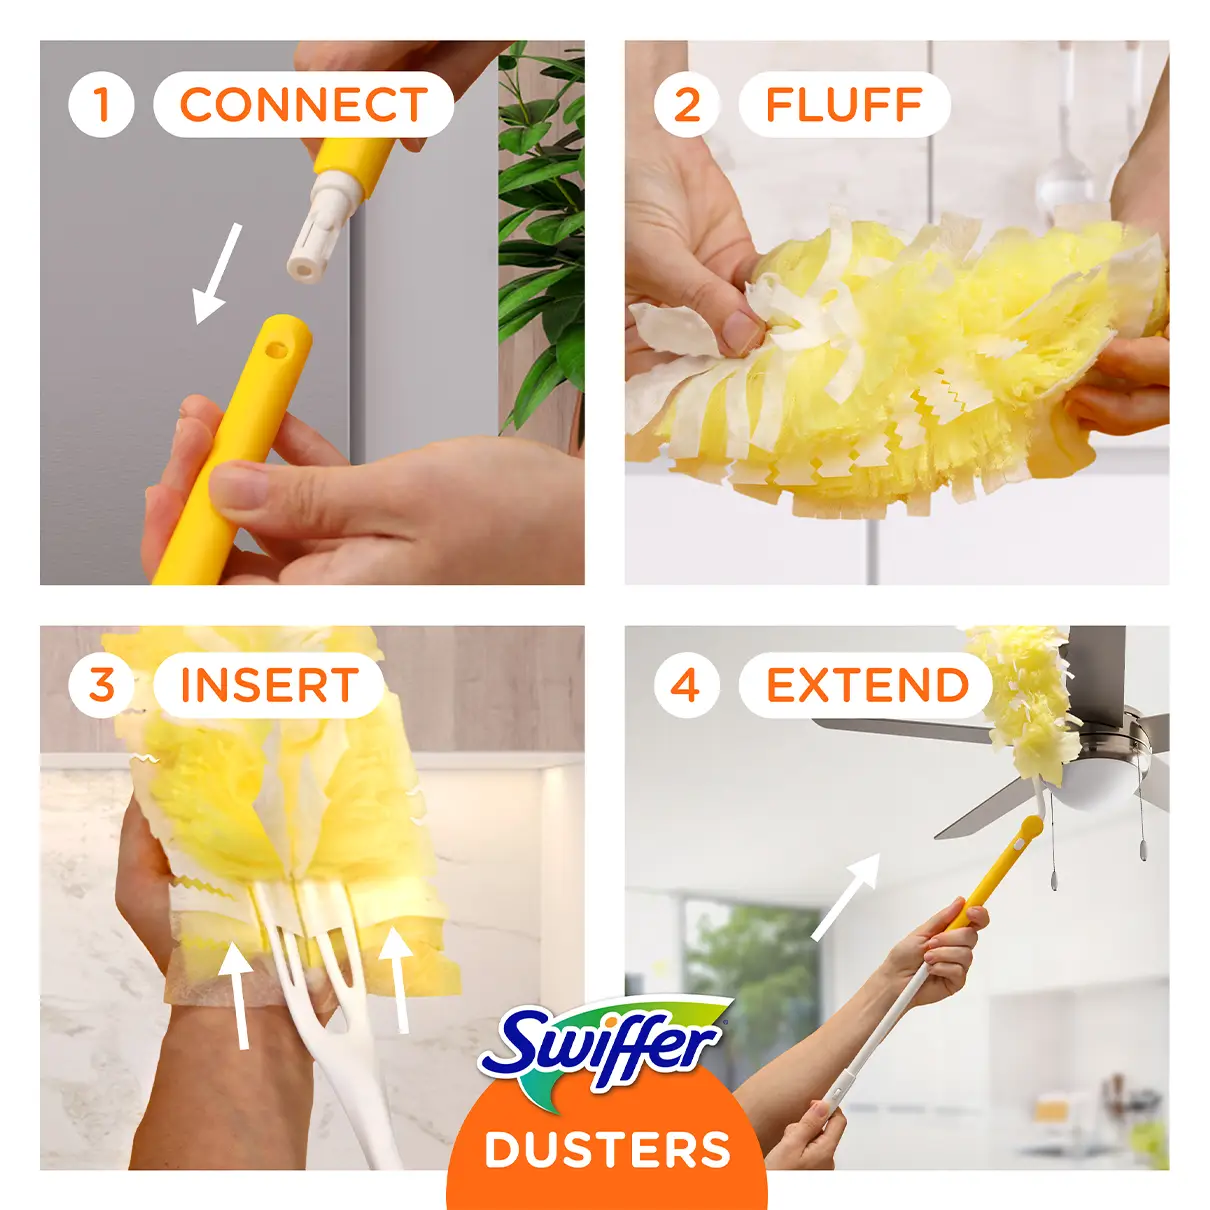 Sneaky Drawbacks You Need To Consider Before Buying A Swiffer